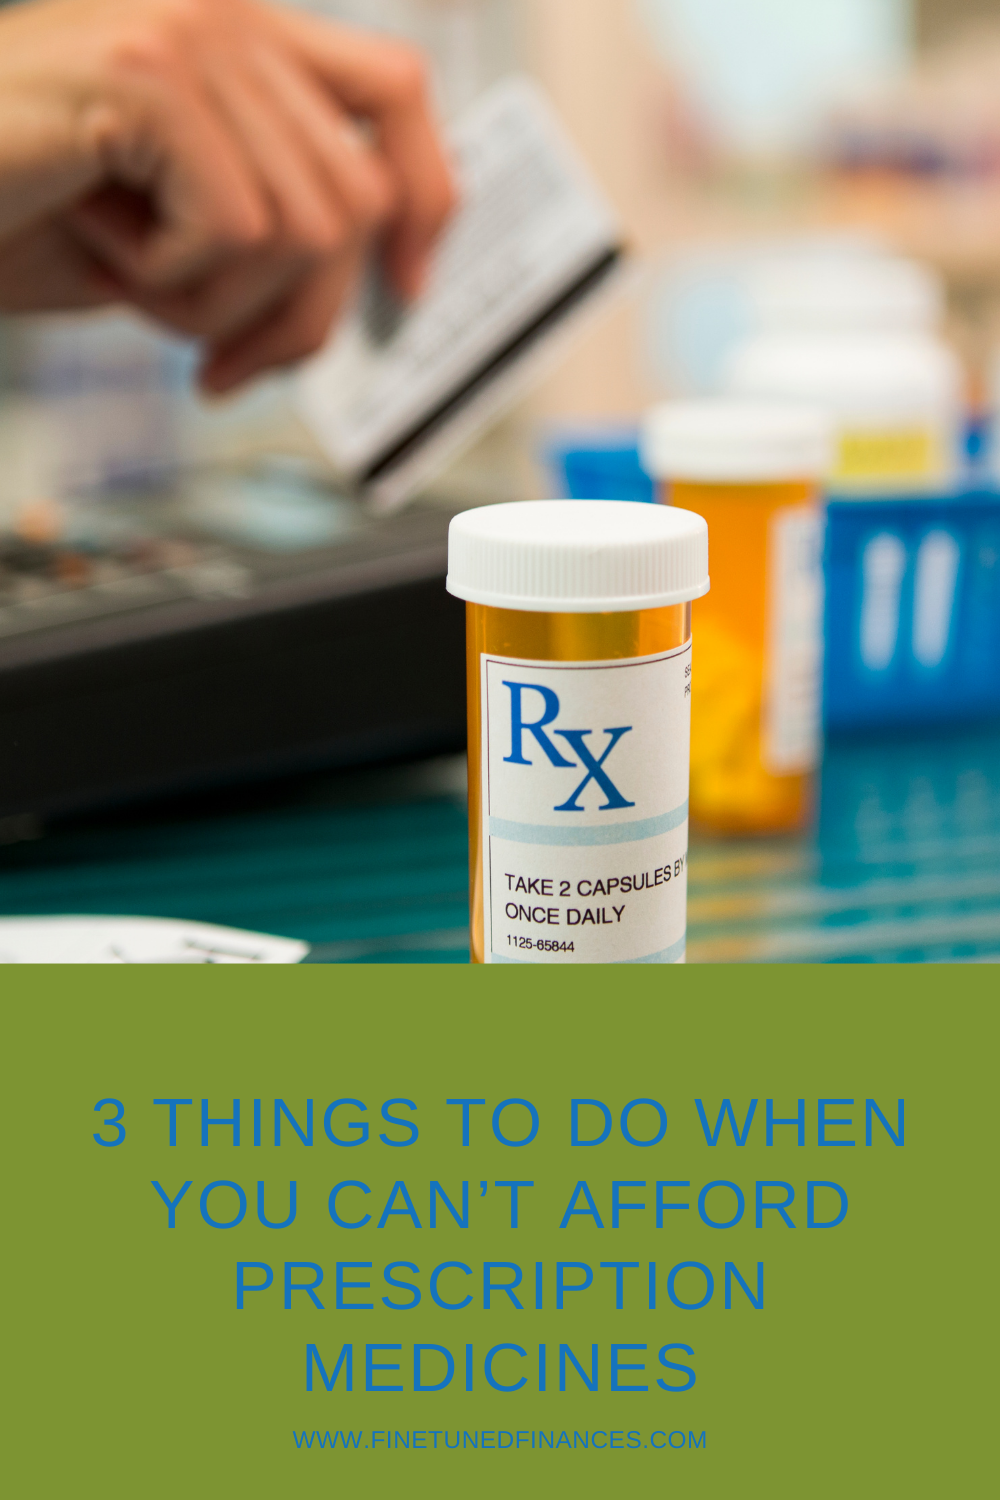 3 Things To Do When You Can’t Afford Prescription Medicines